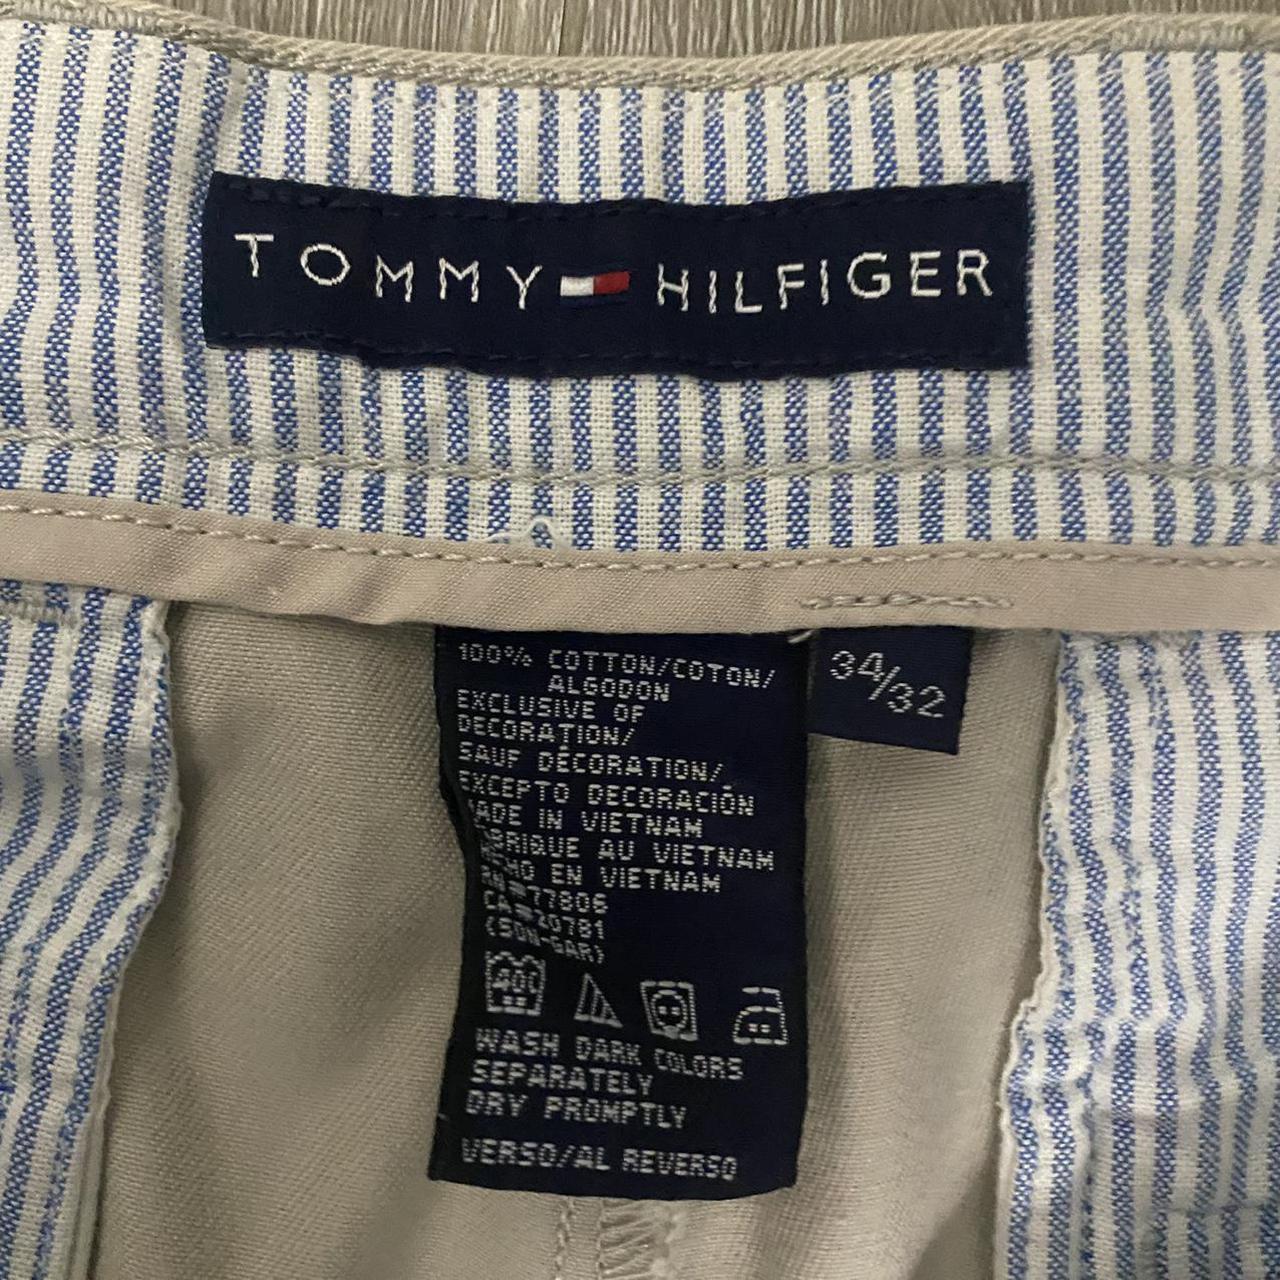 Product Image 3 - Vintage Tommy Hilfiger pants 34x32
In